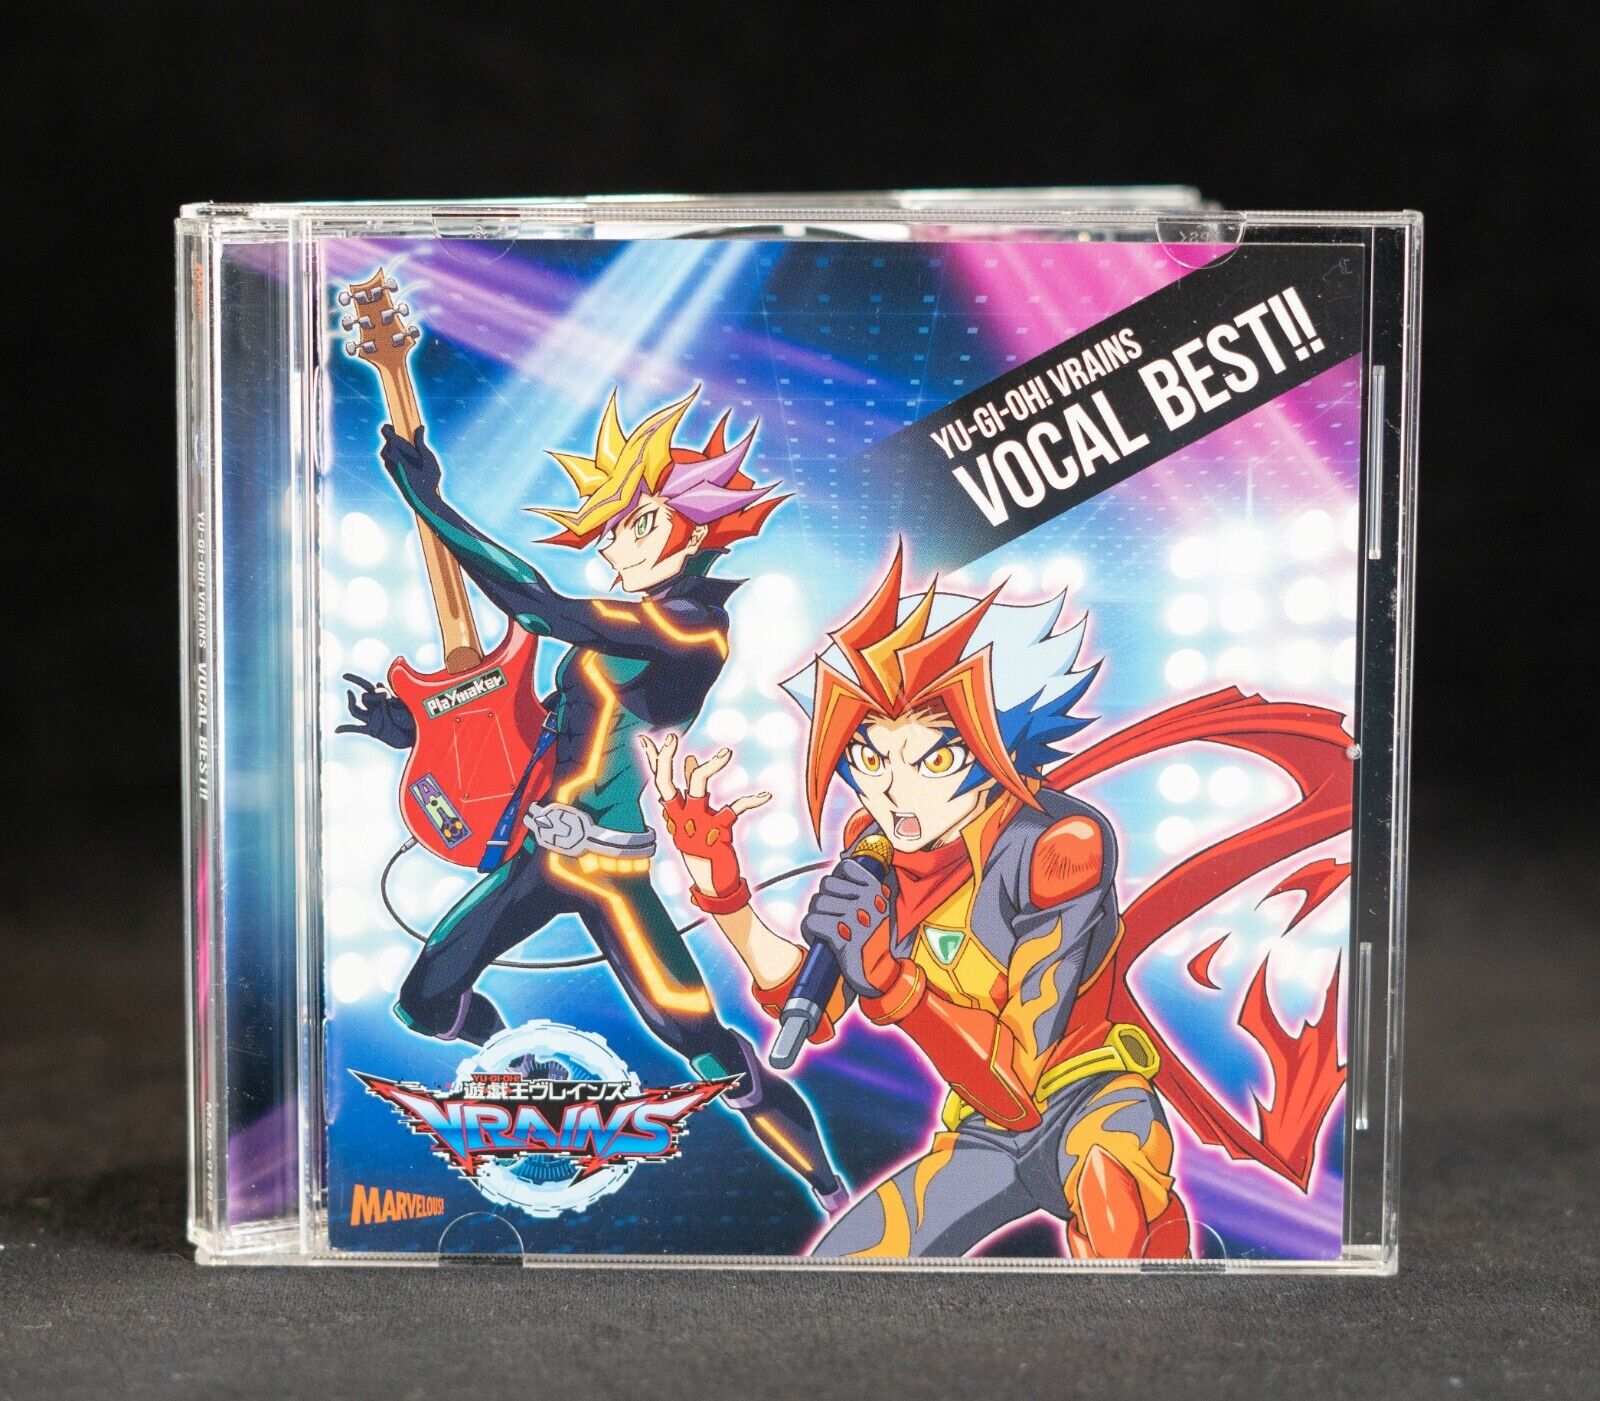 YU-GI-OH VRAINS VOCAL BEST CD MJSA-01282 Standard Edition Anime Theme Songs